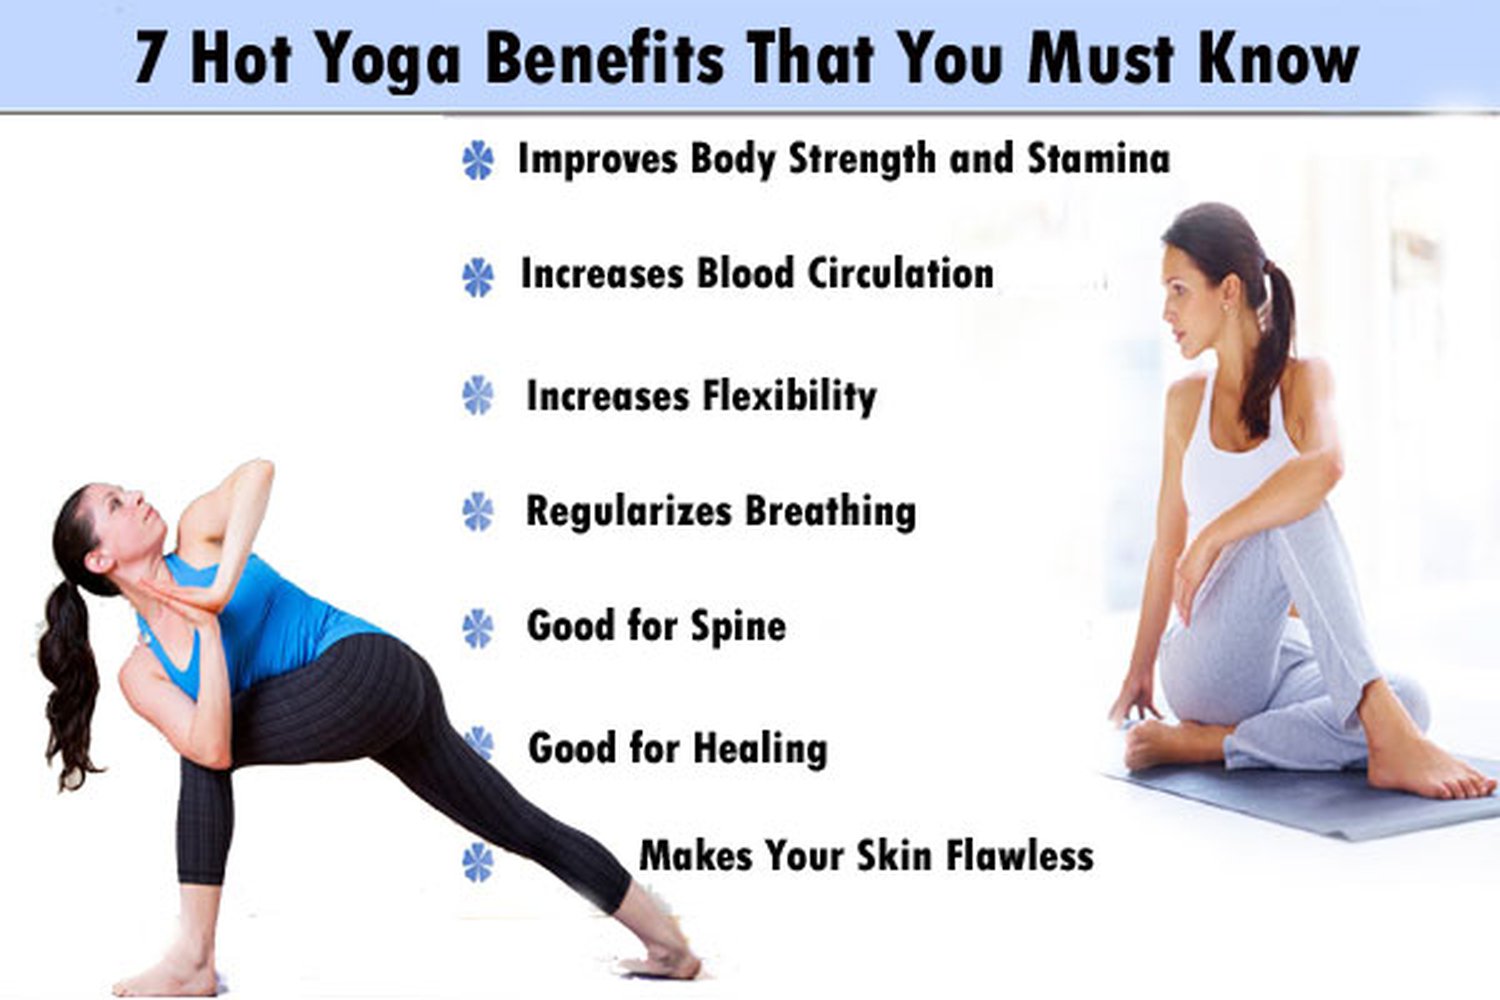 What are the benefits of hot yoga? - Quora